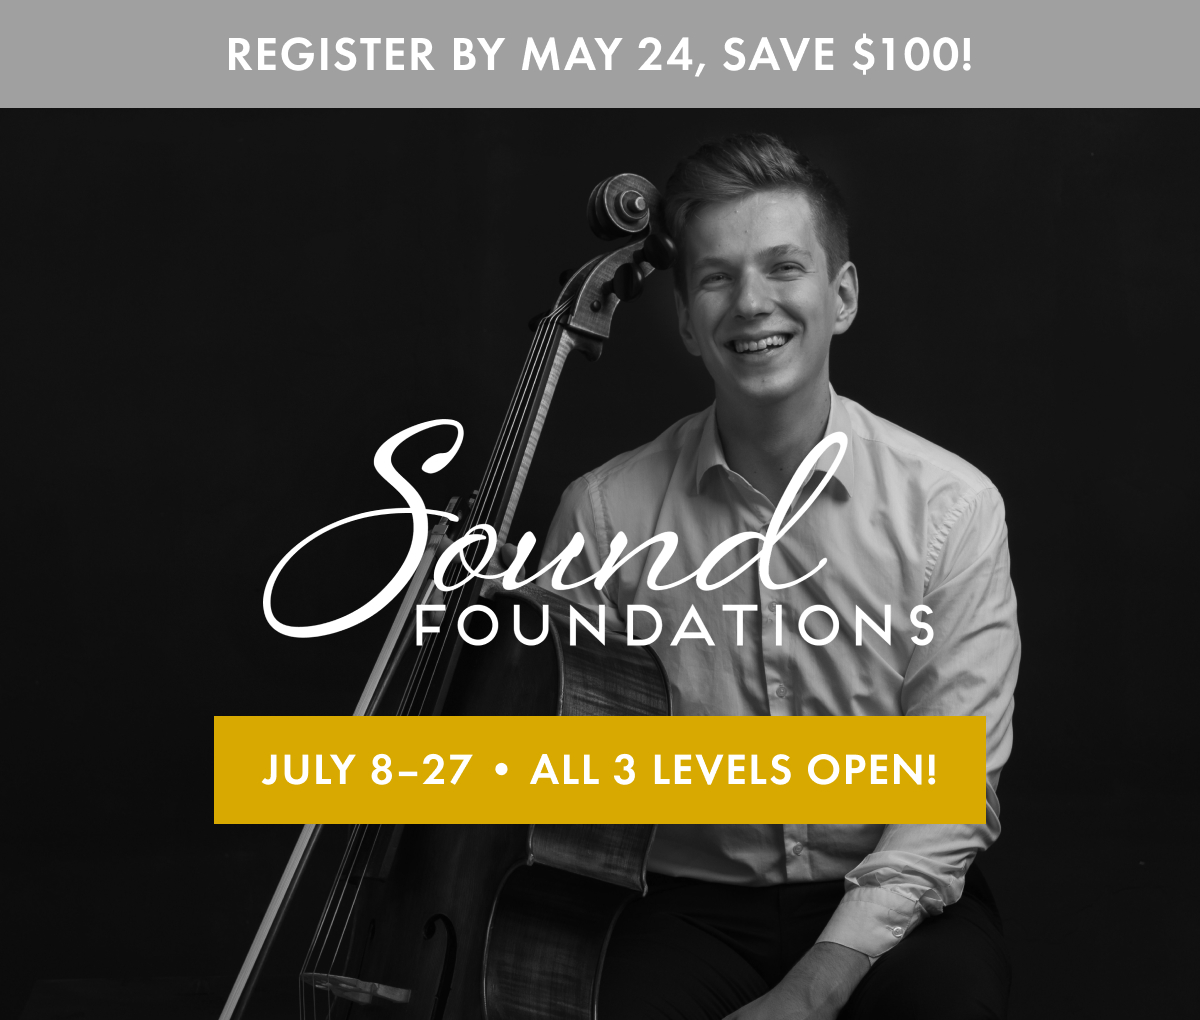 Sound Foundations: Equipping Young Musicians for Excellence